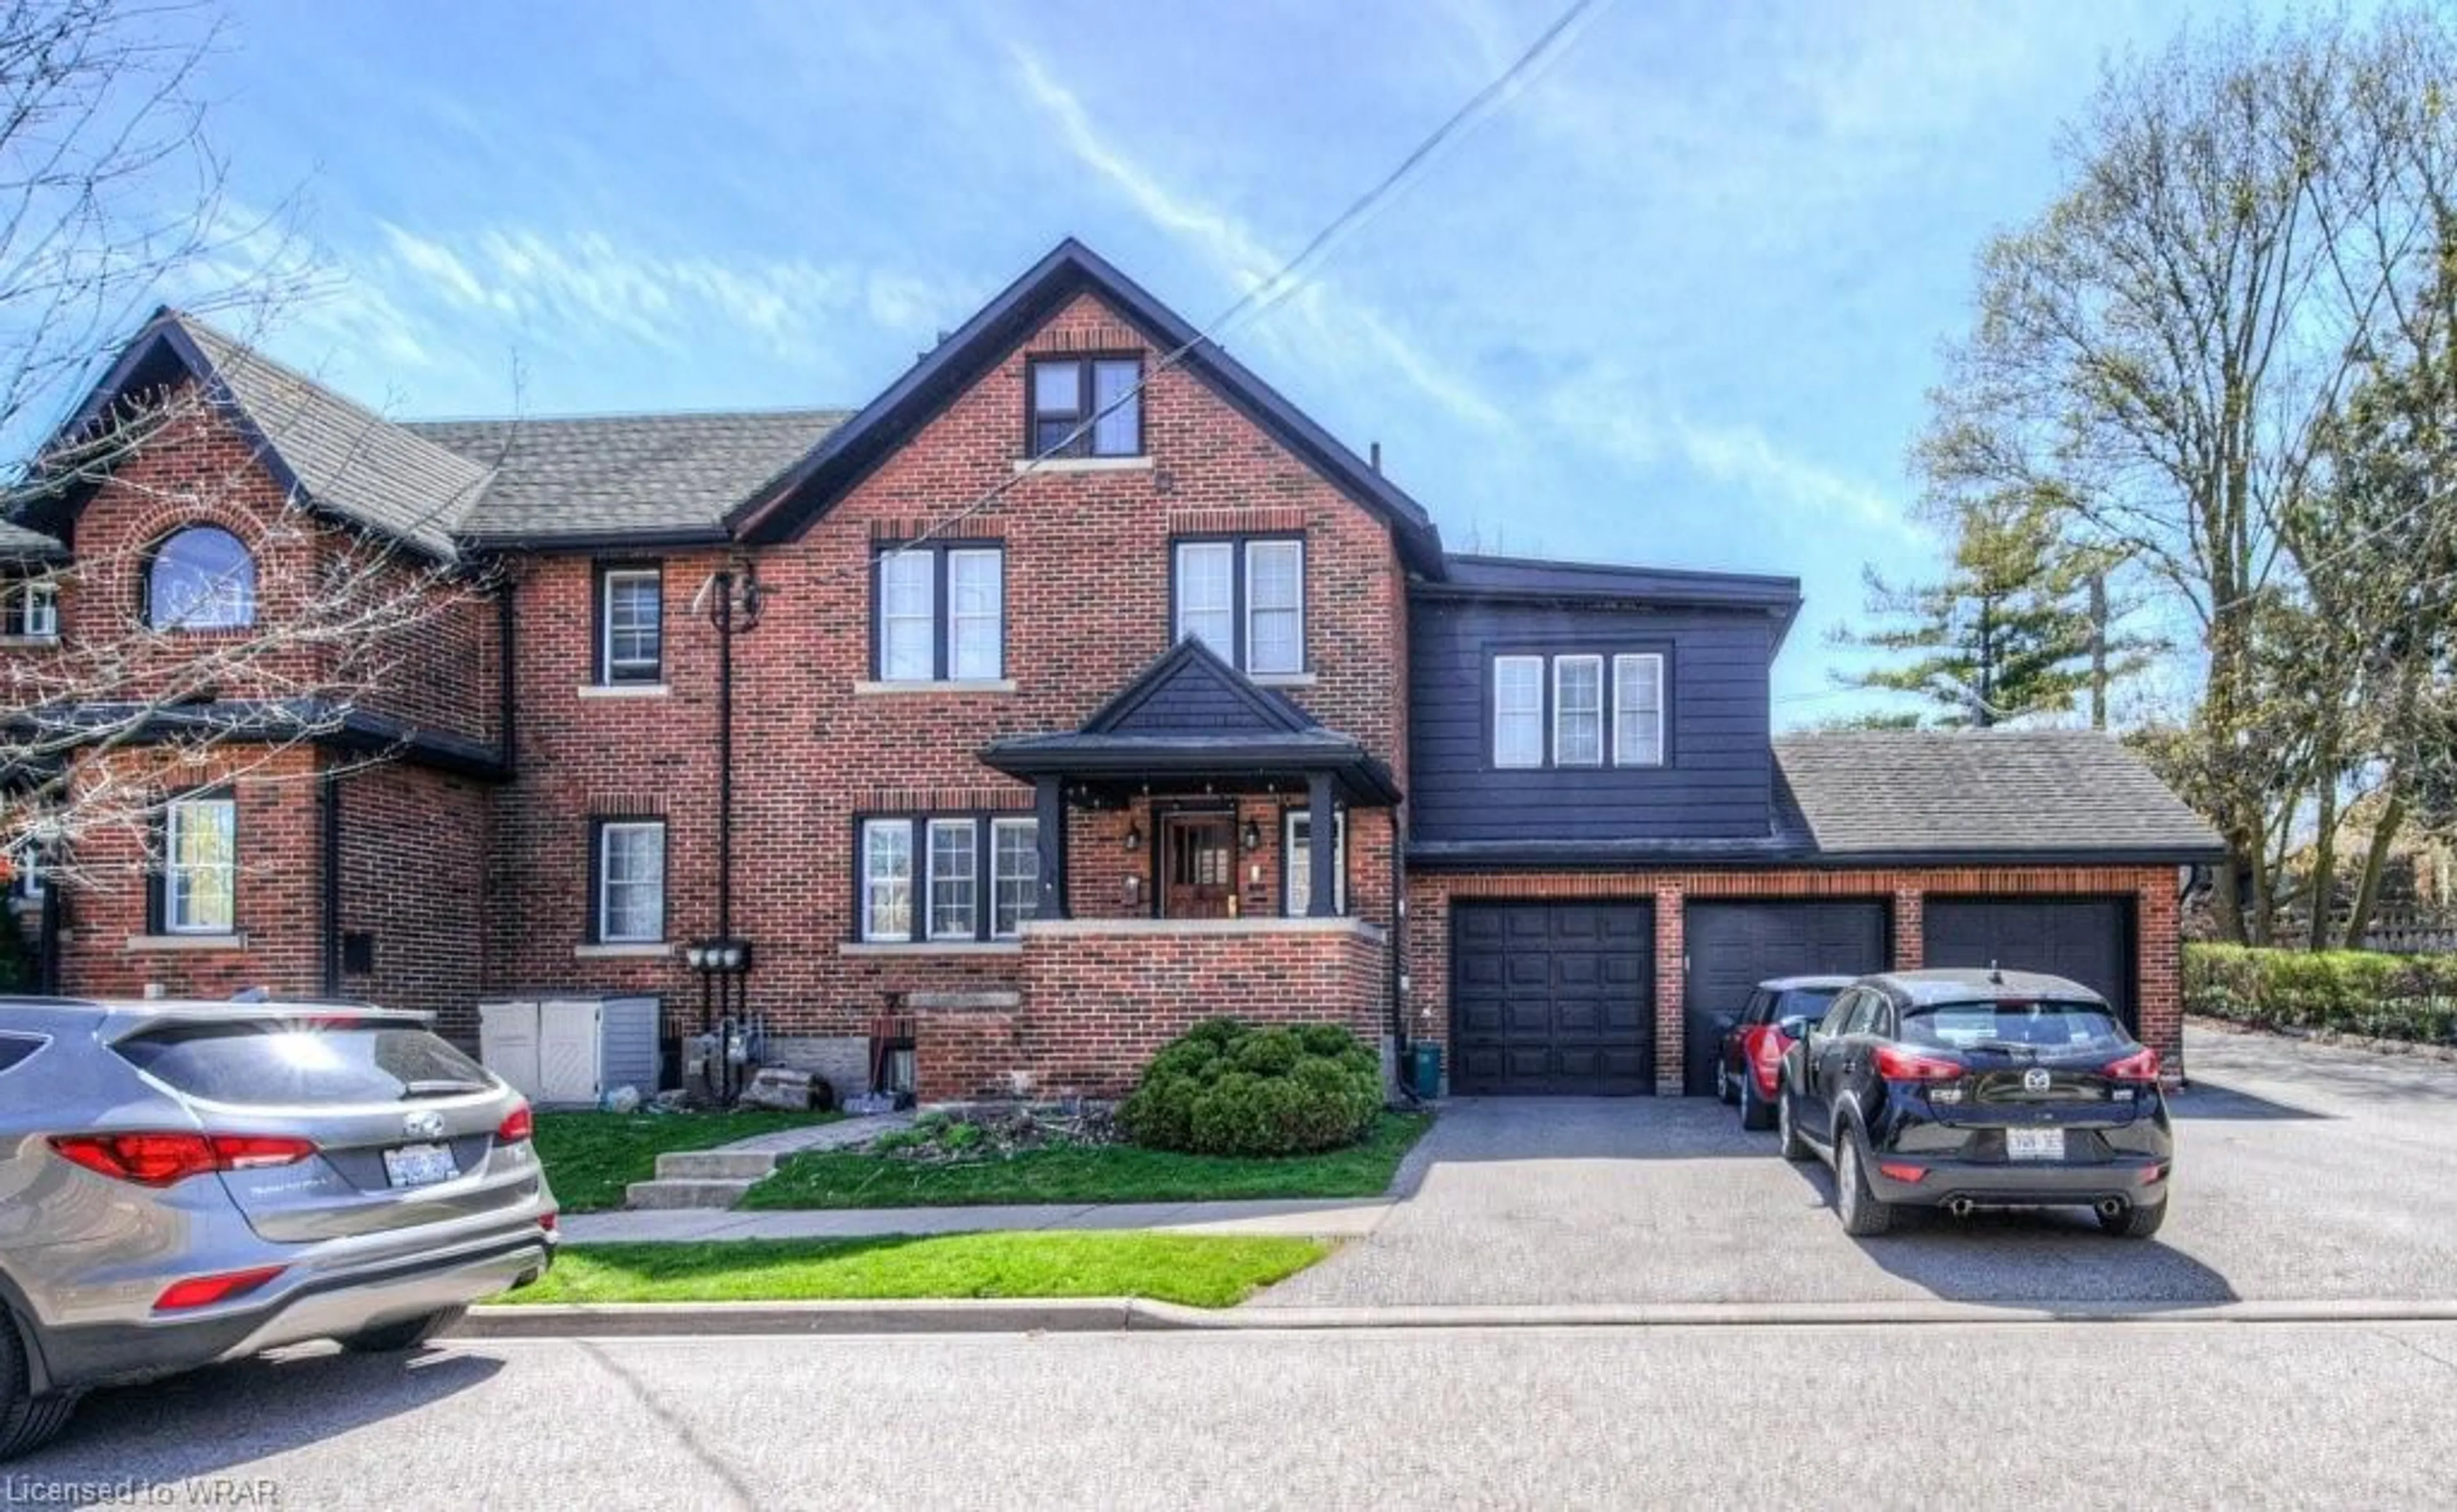 Home with brick exterior material for 84 - 88 John St, Waterloo Ontario N2L 1C1